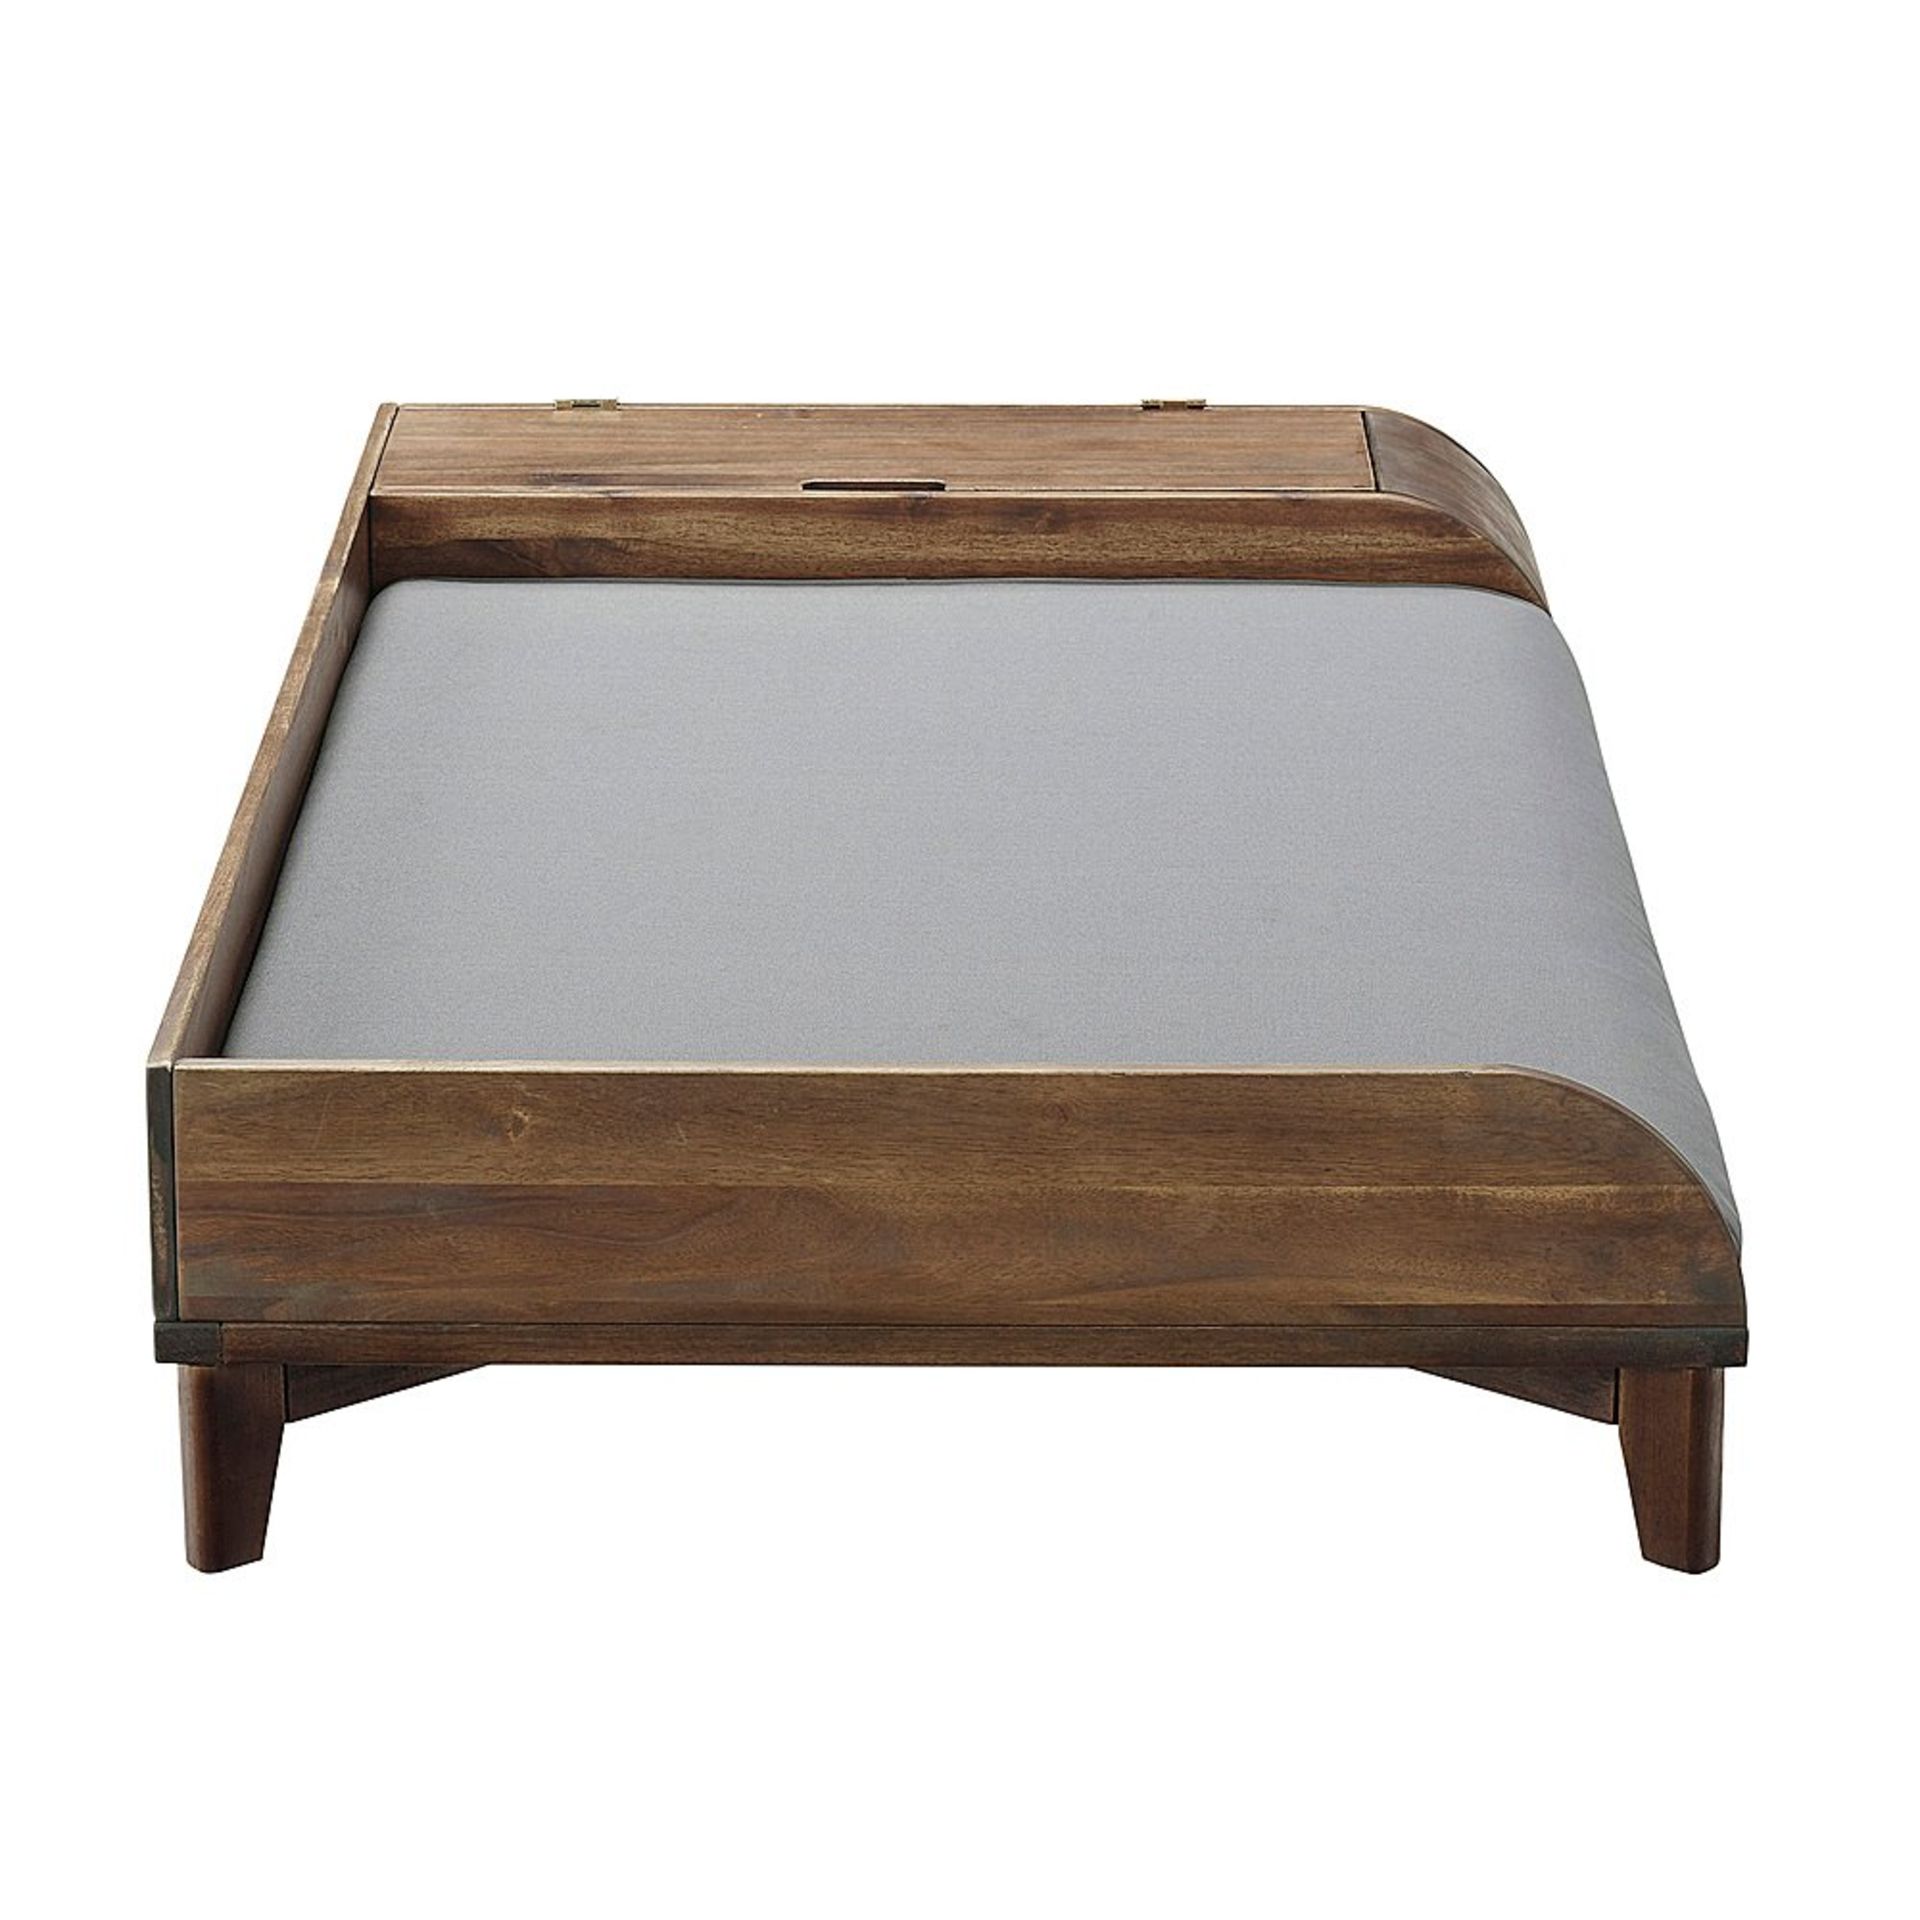 SOLID WOOD STORAGE PED BED WITH CUSHION IN DARK BROWN/GREY - RRP £245 - Image 7 of 7